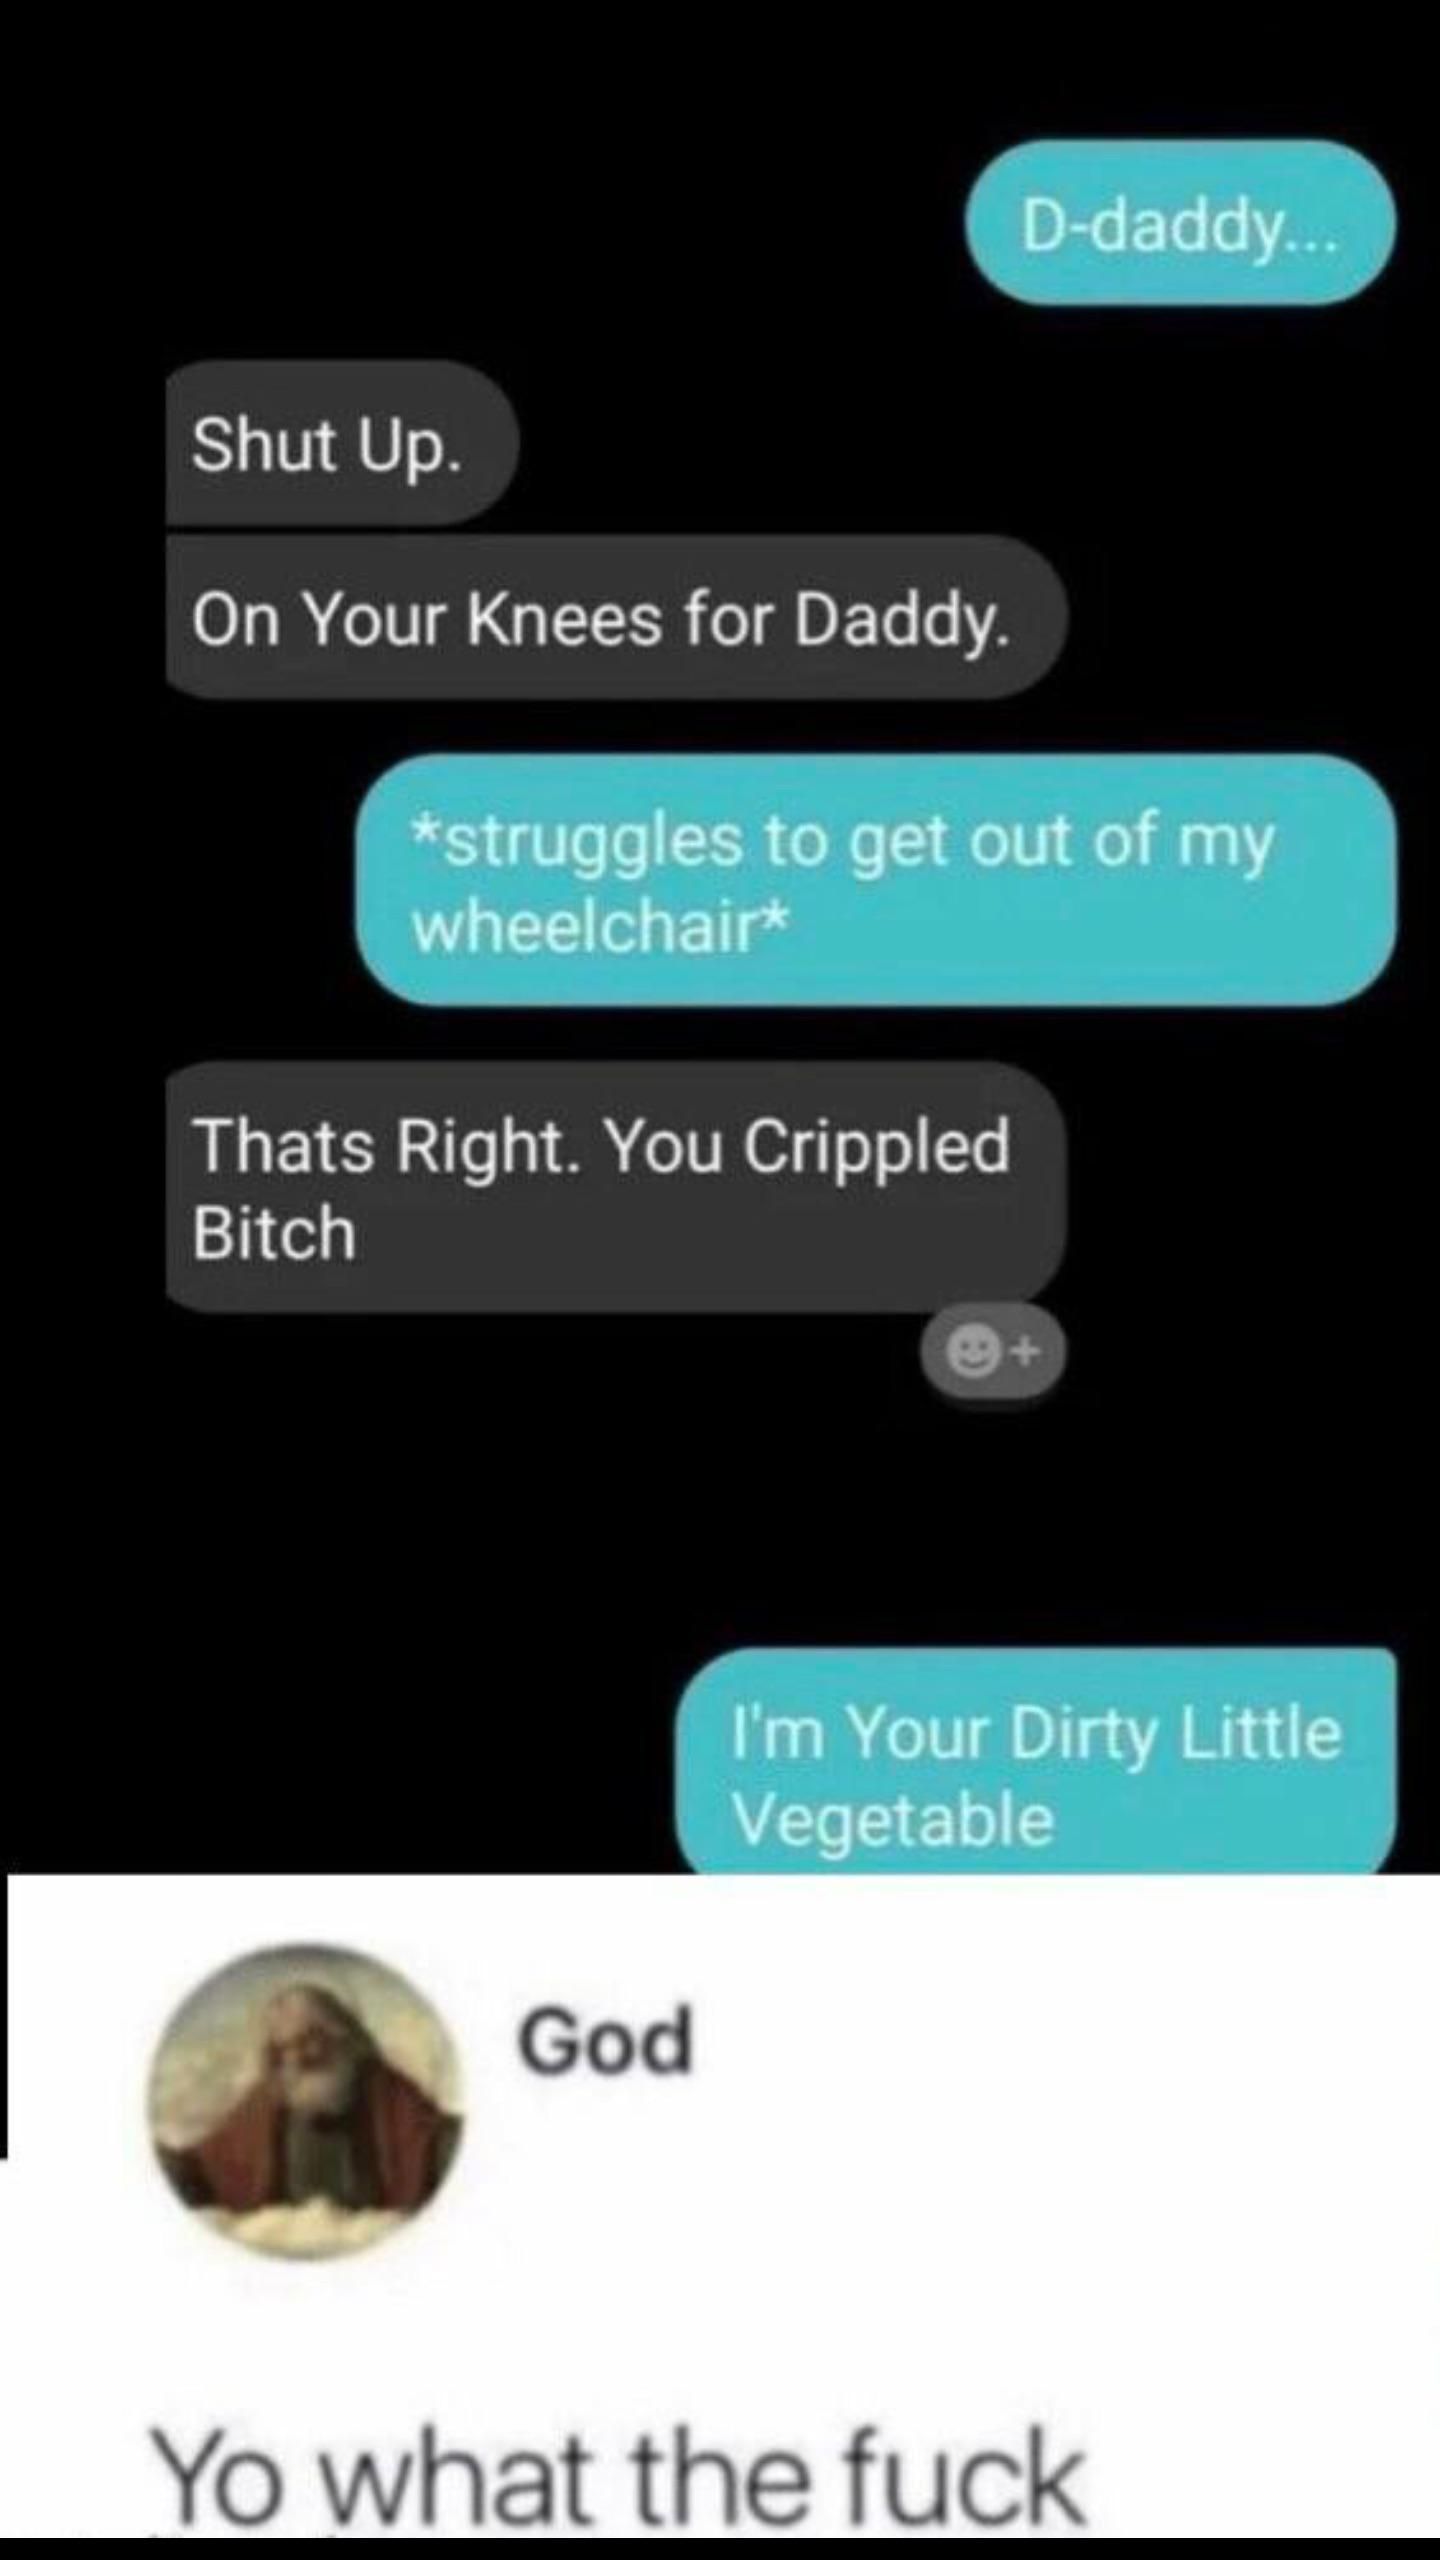 nothing wrong with vegetable roleplay